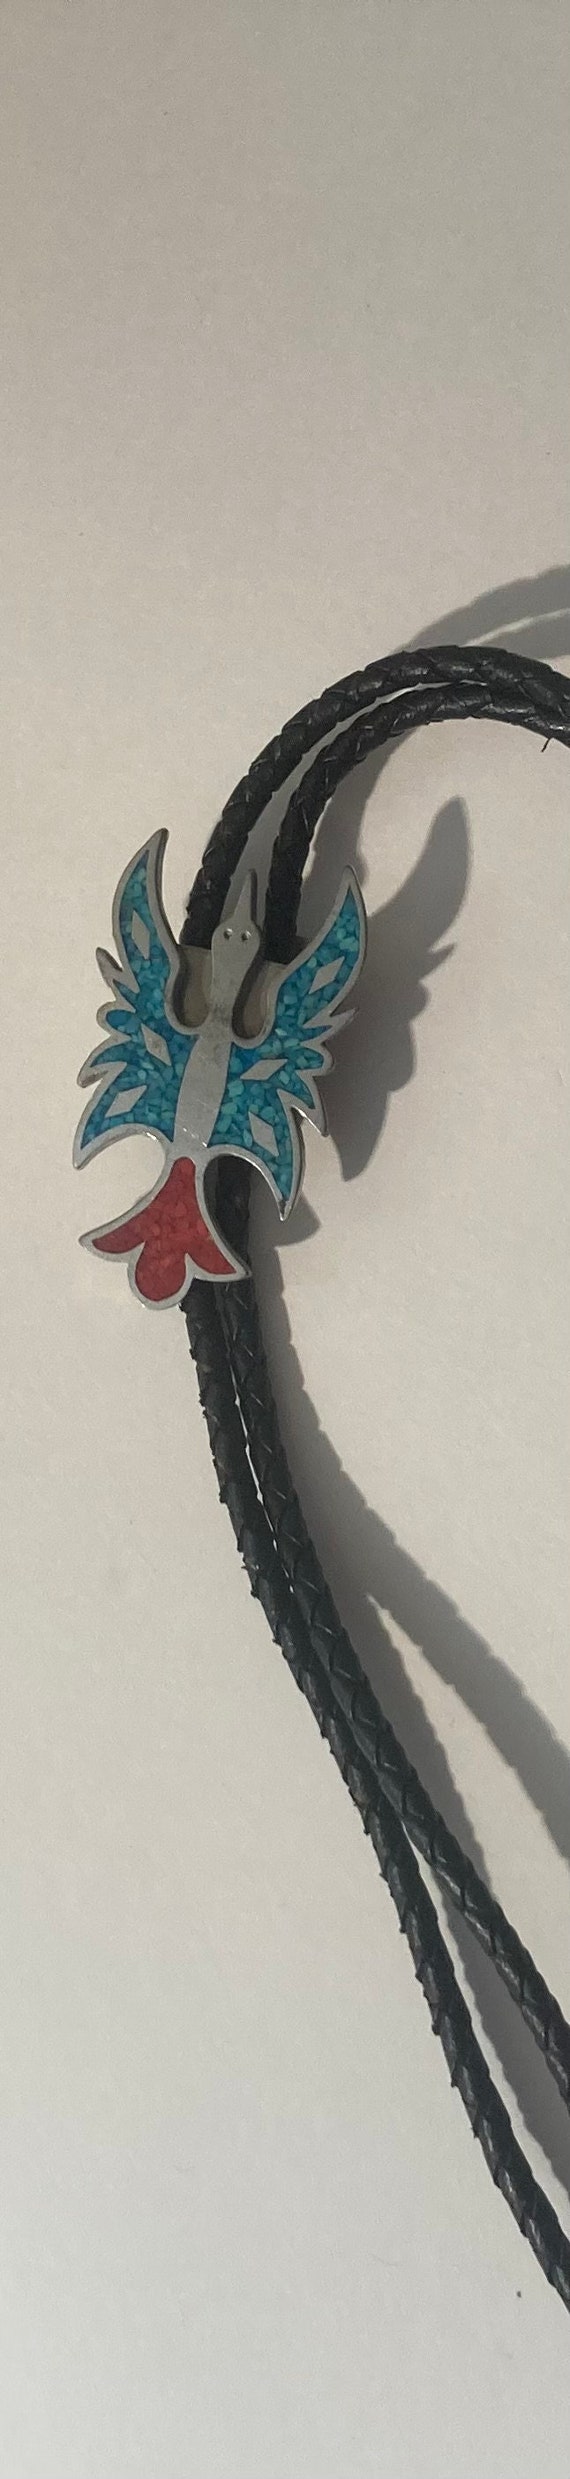 Vintage Metal Bolo Tie, Silver and Blue and Red St